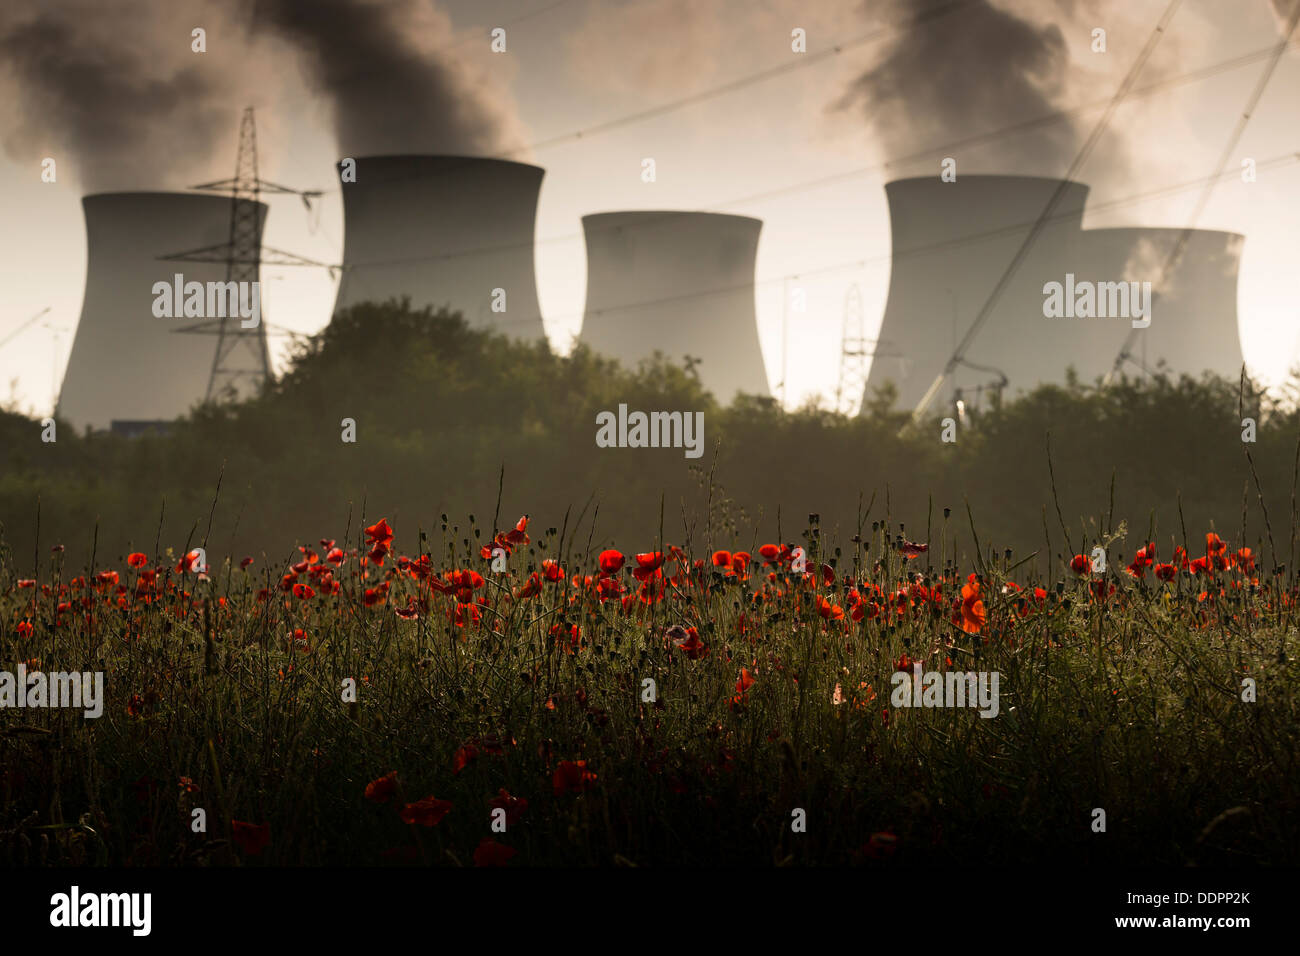 Ferrybridge C coal fired power station in West Yorkshire, with a field of red poppies in the foreground. Stock Photo